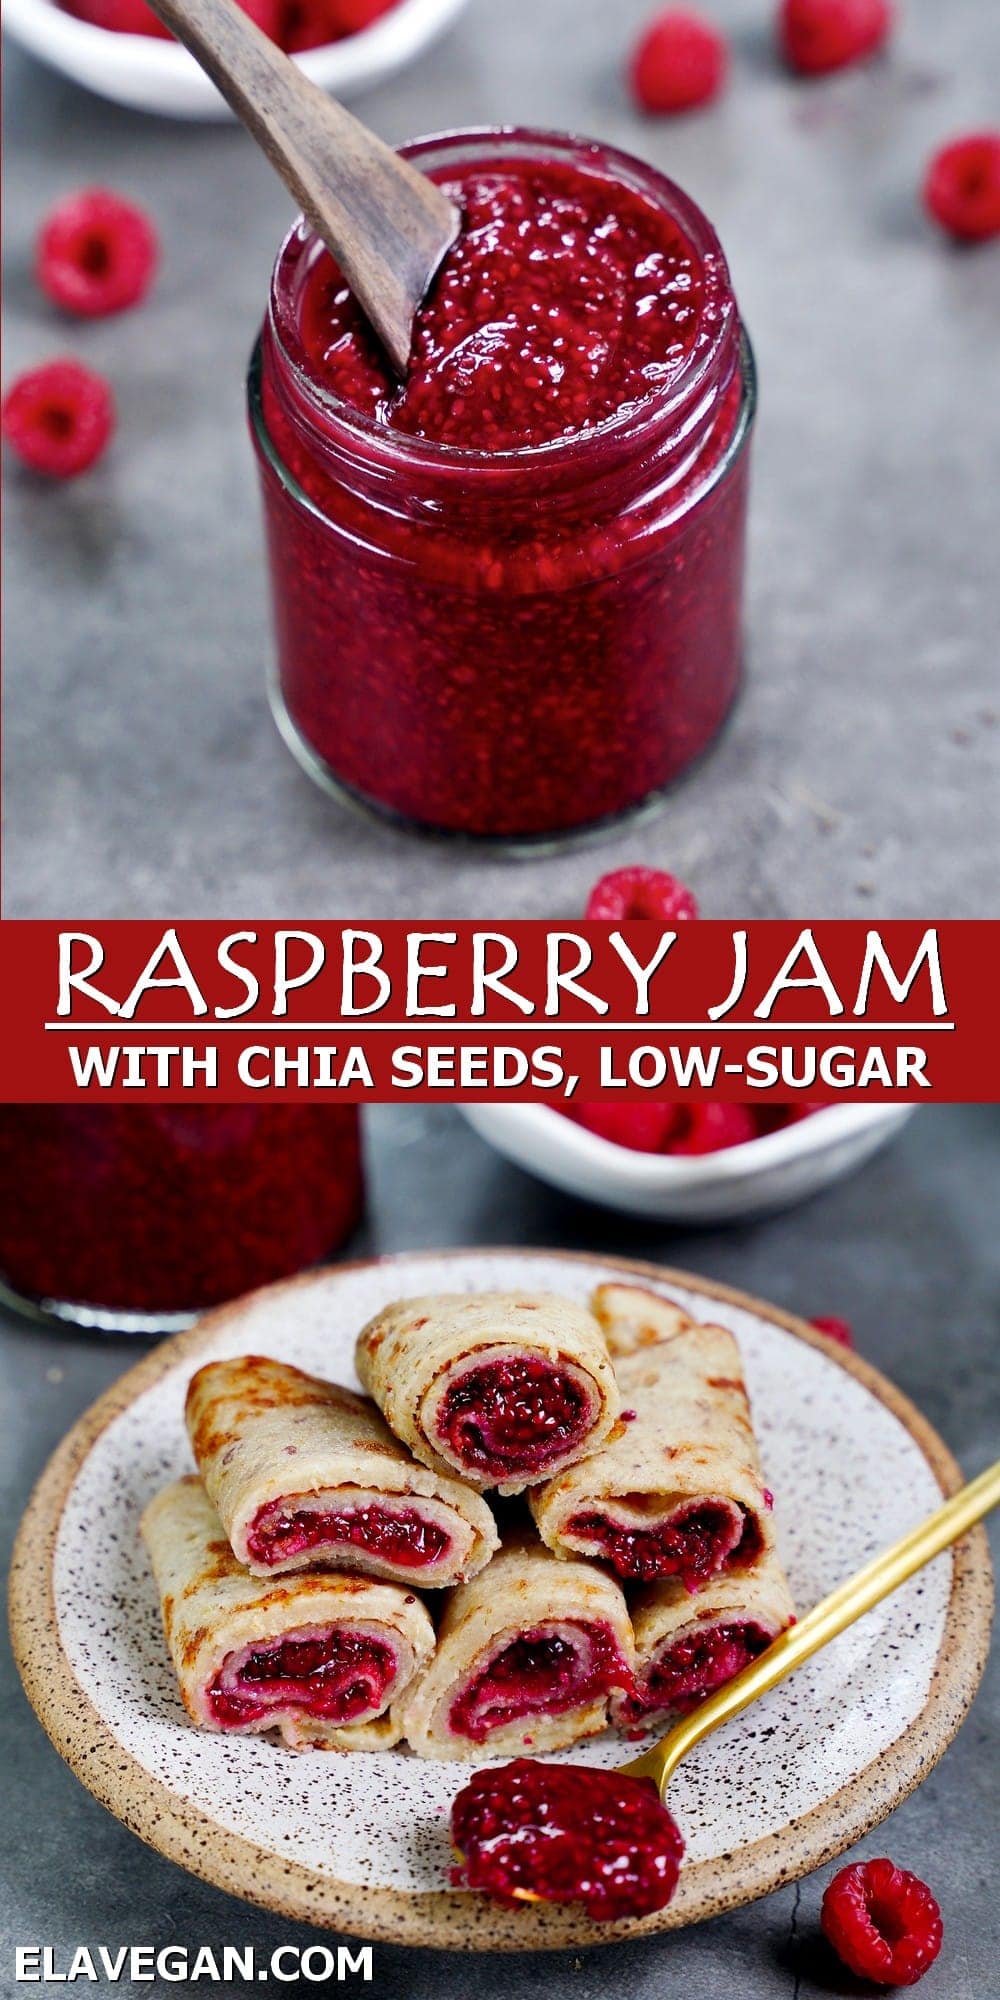 Pinterest Collage Raspberry Jam with chia seeds, low-sugar